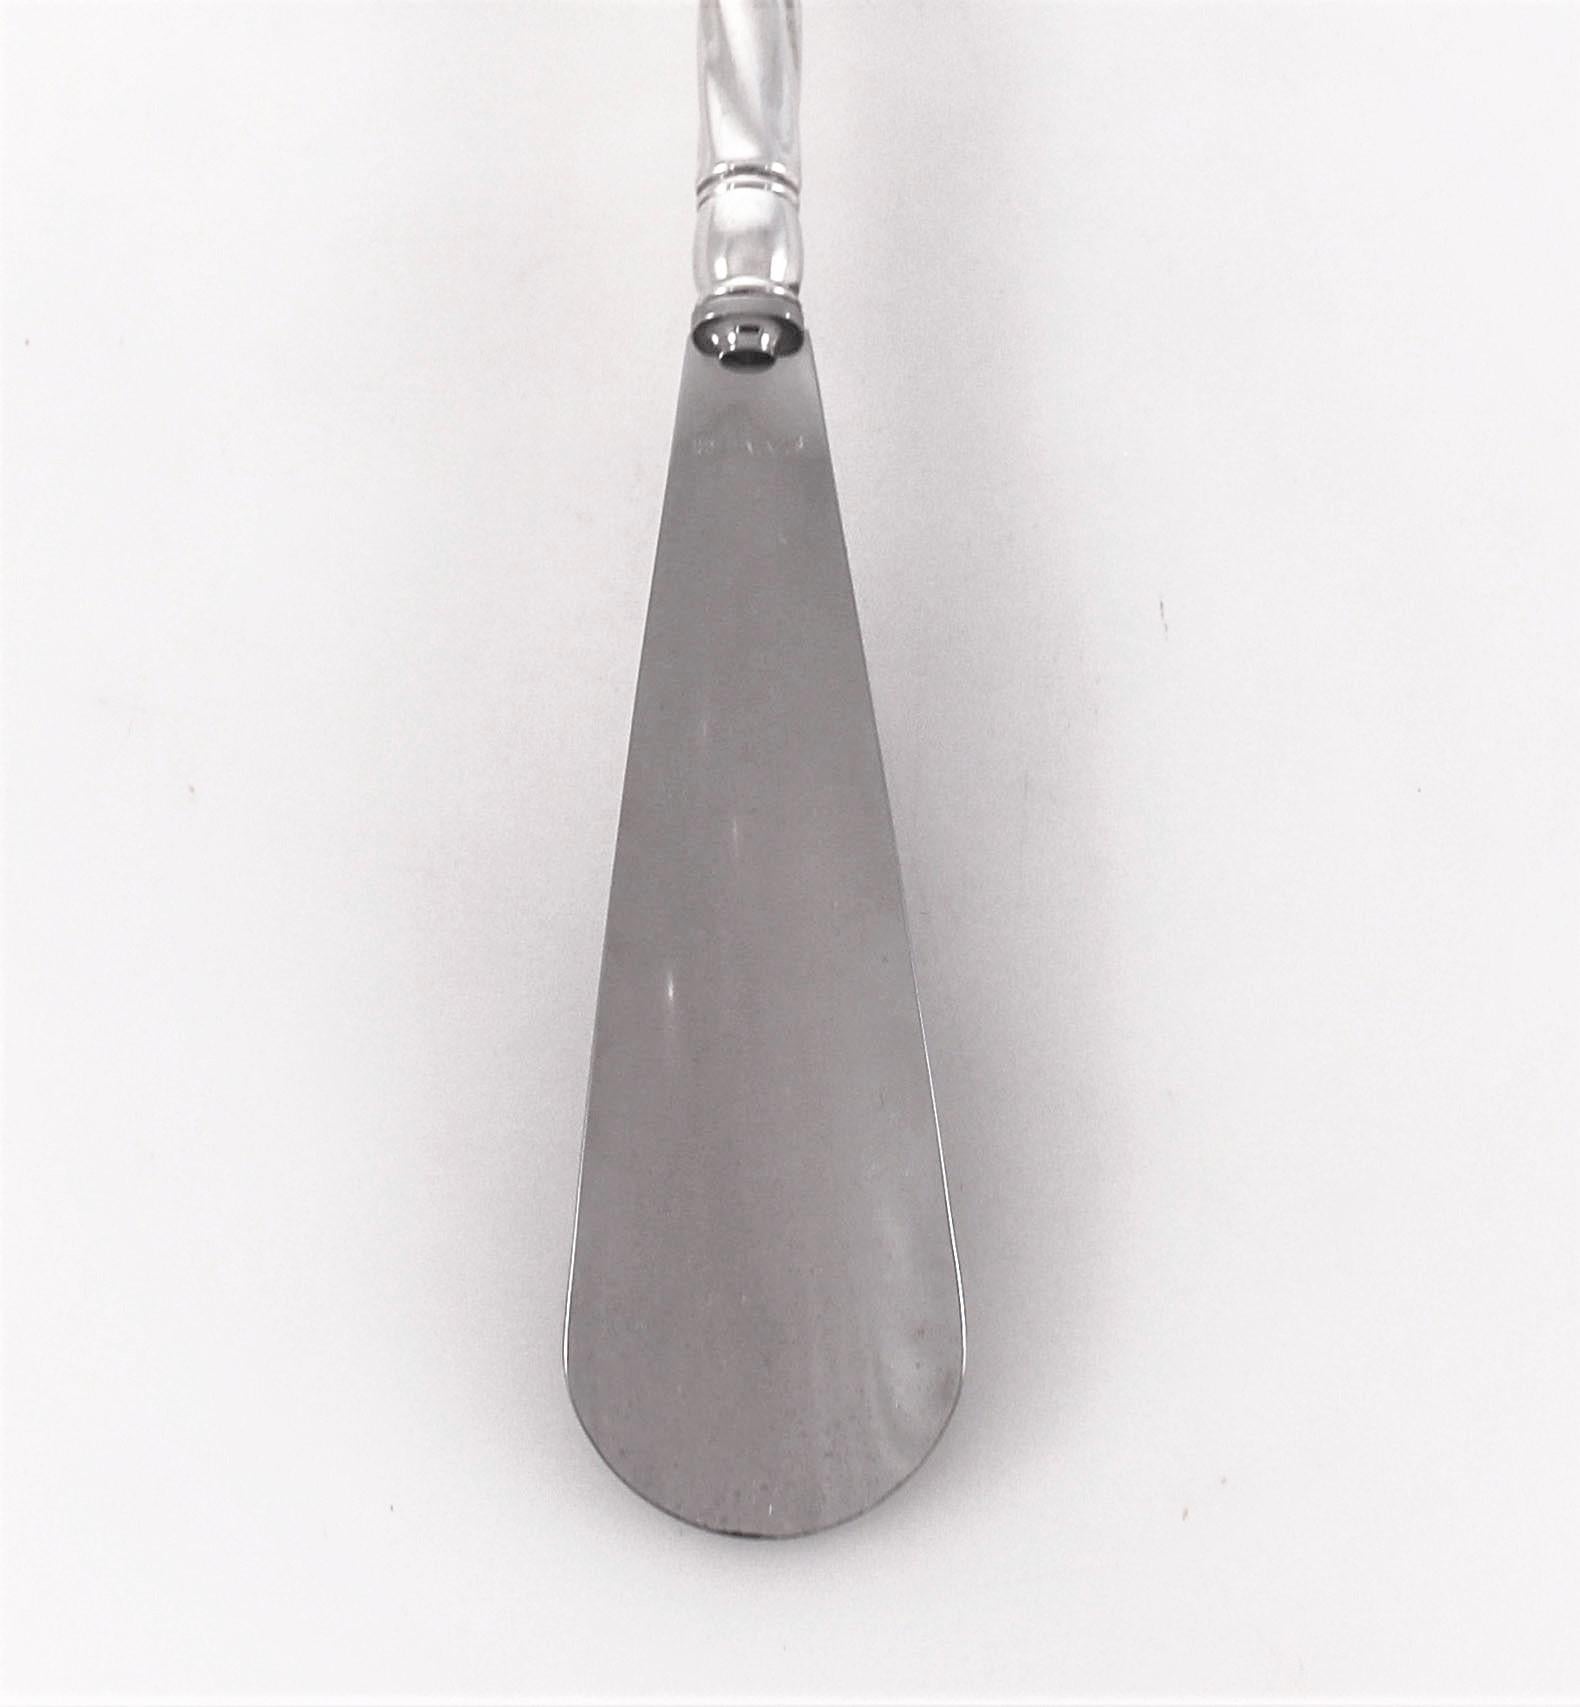 Offering a sterling silver unisex shoehorn. It has an extra long handle that is ideal for not having to bend down. The handle has a modern swirl design which makes it unisex. A great gift for that someone that has (almost) everything.